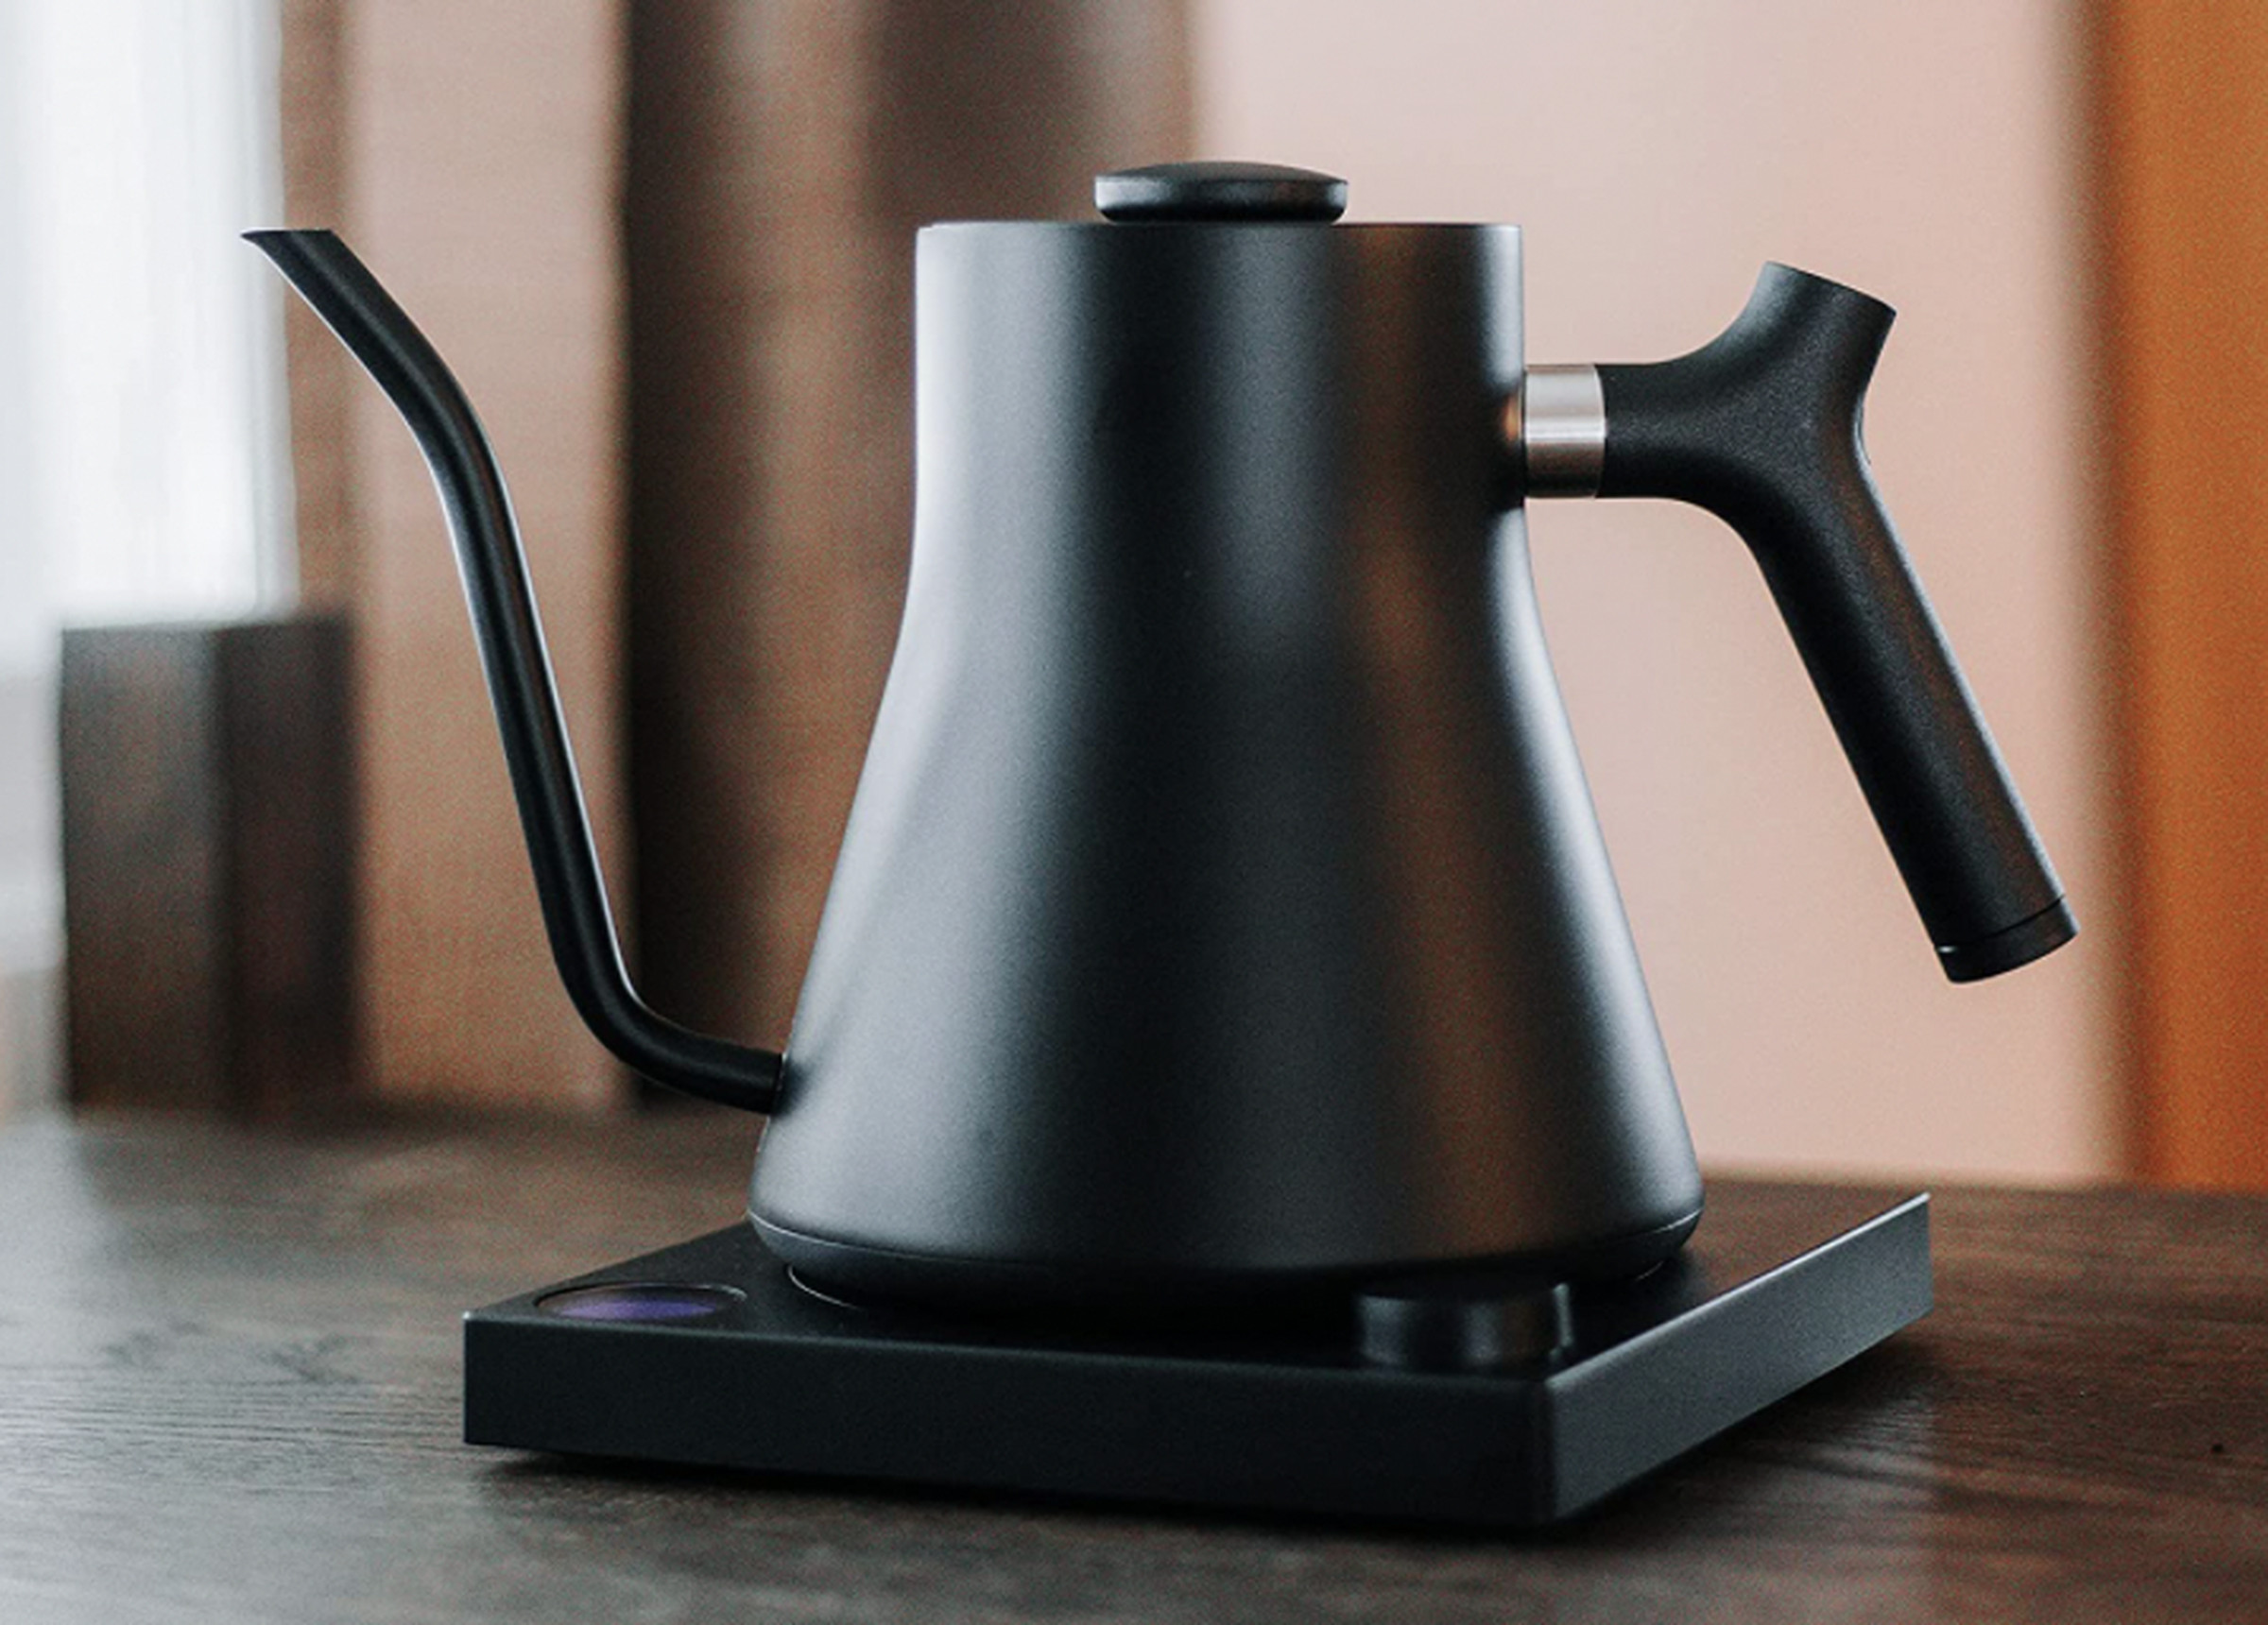 You can quickly choose your desired temperature while using the Fellow Stagg Kettle.